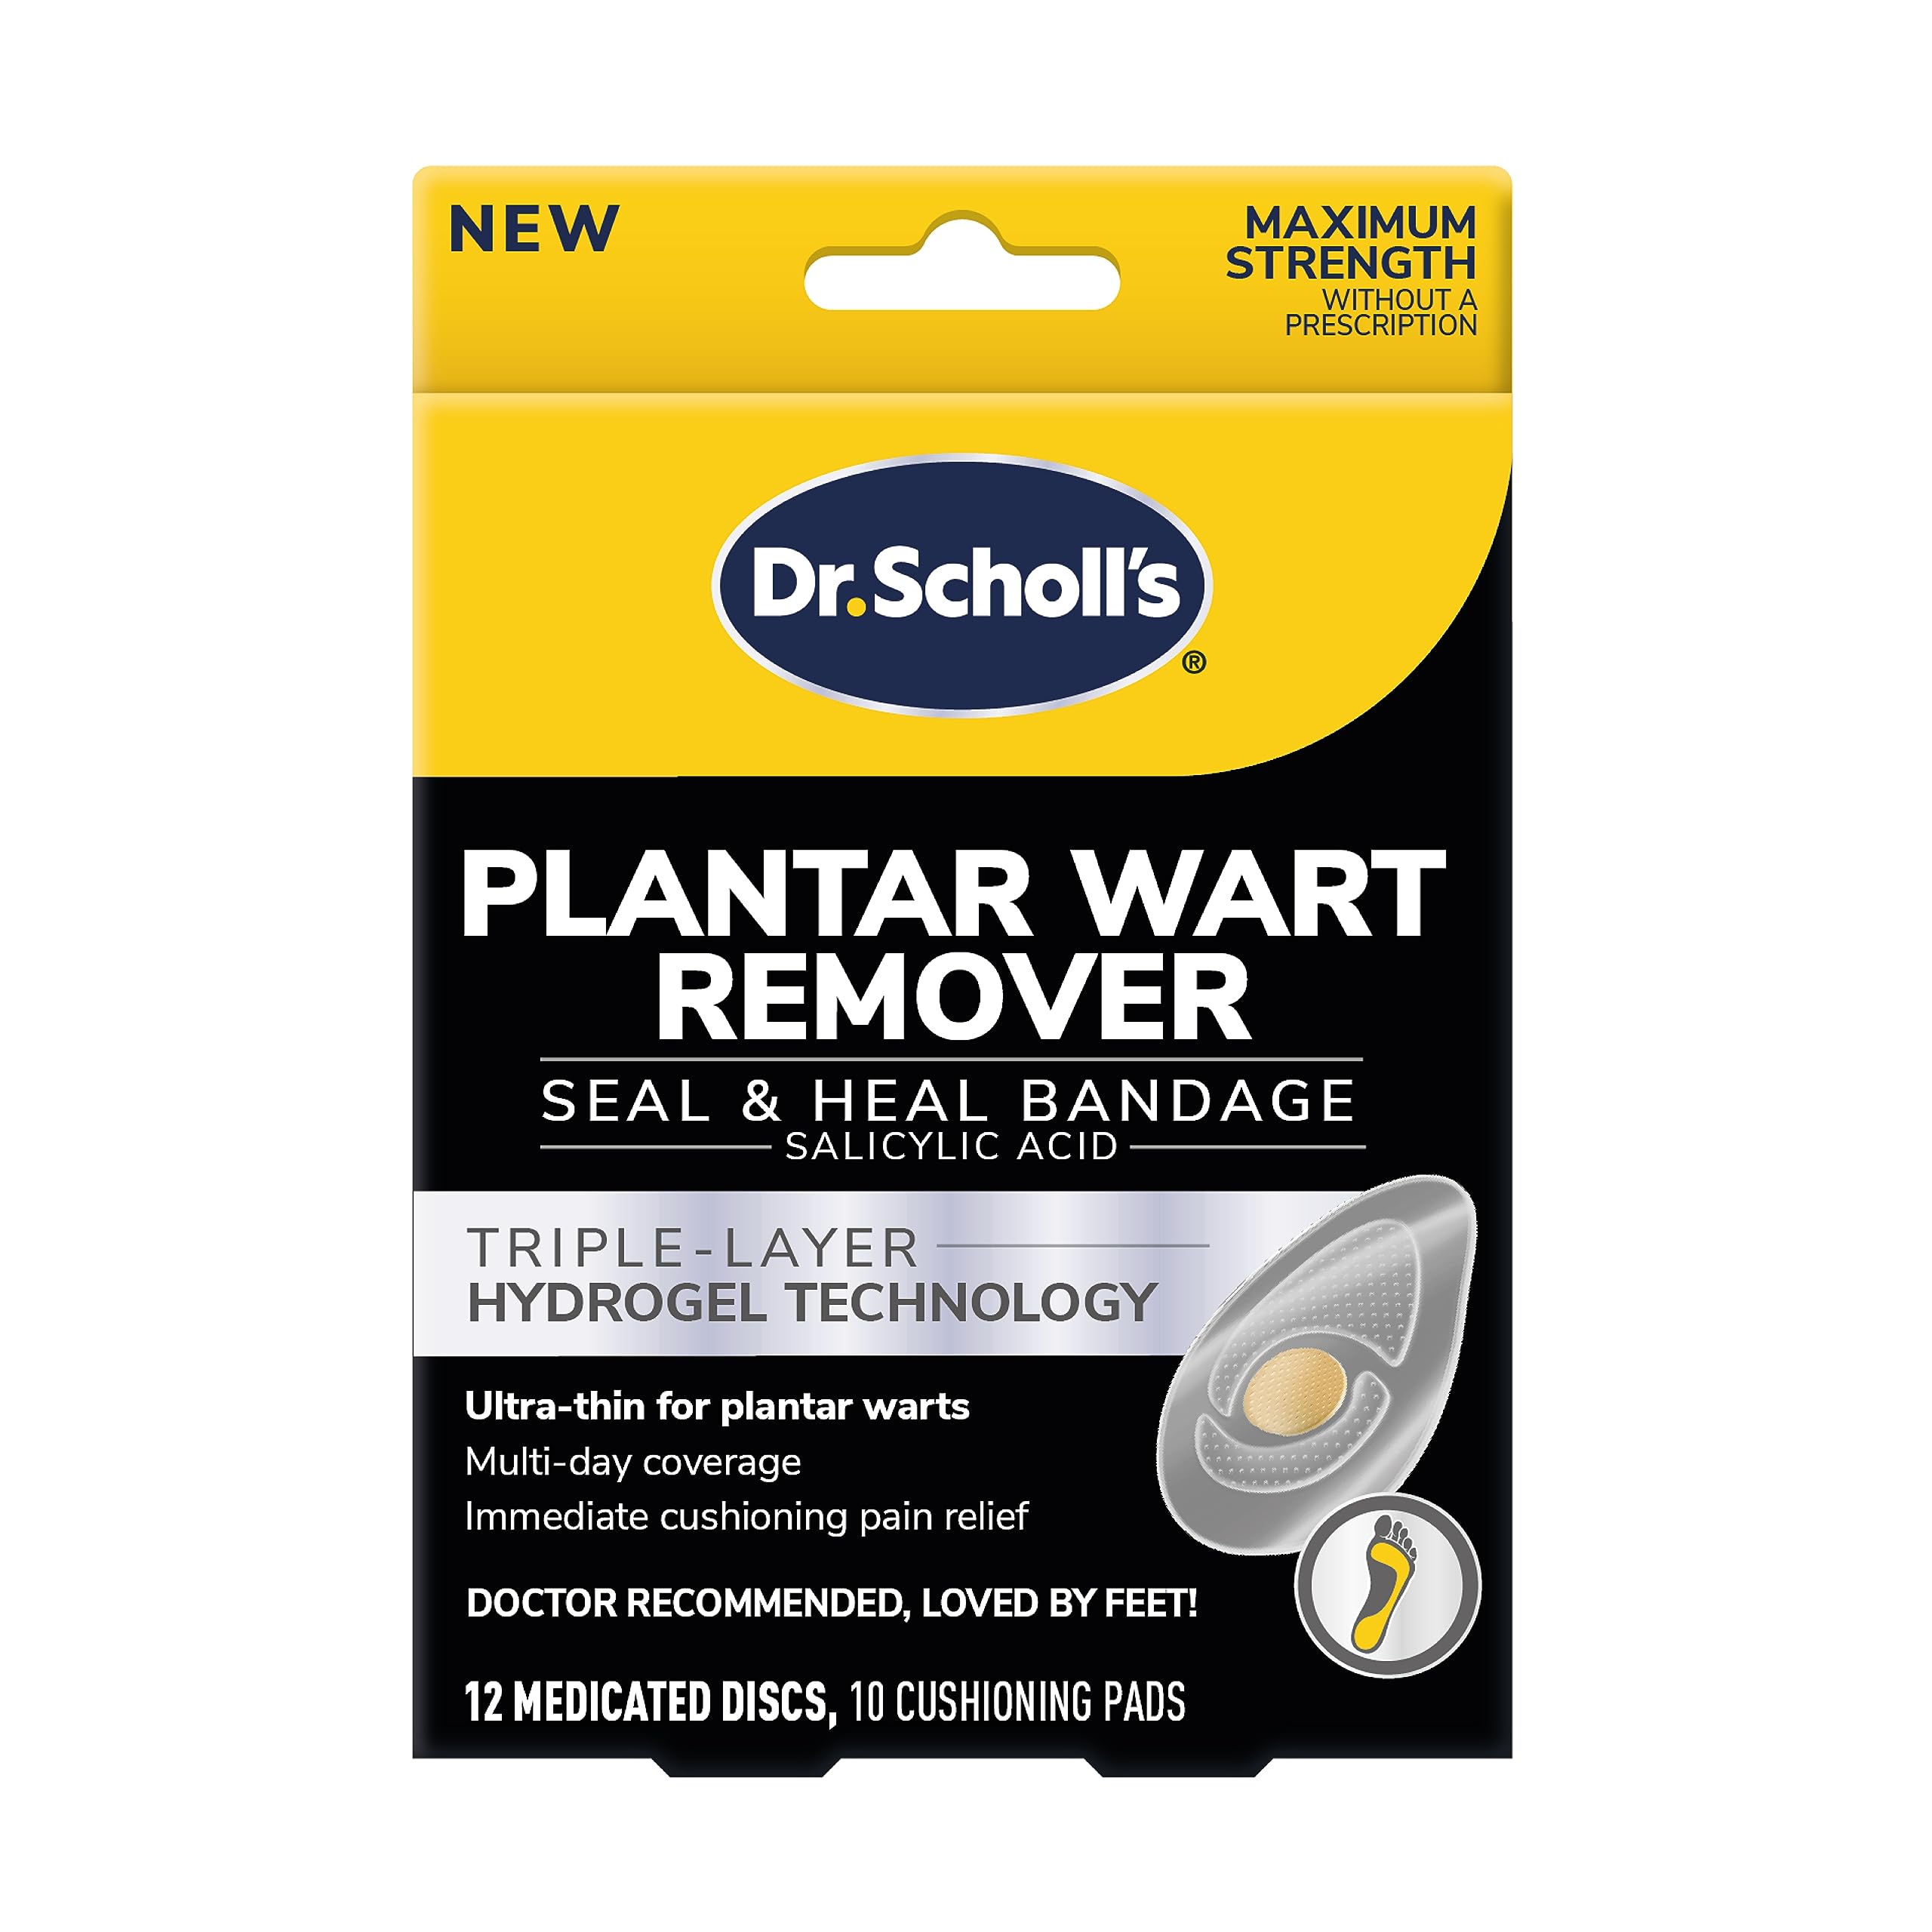 Dr. Scholl's Plantar WART Remover HYDROGEL Bandage // 12 Discs/10 Cushions, Immediate Cushioning Pain Relief, Ultra-Thin, Maximum Strength, 12 Treatments